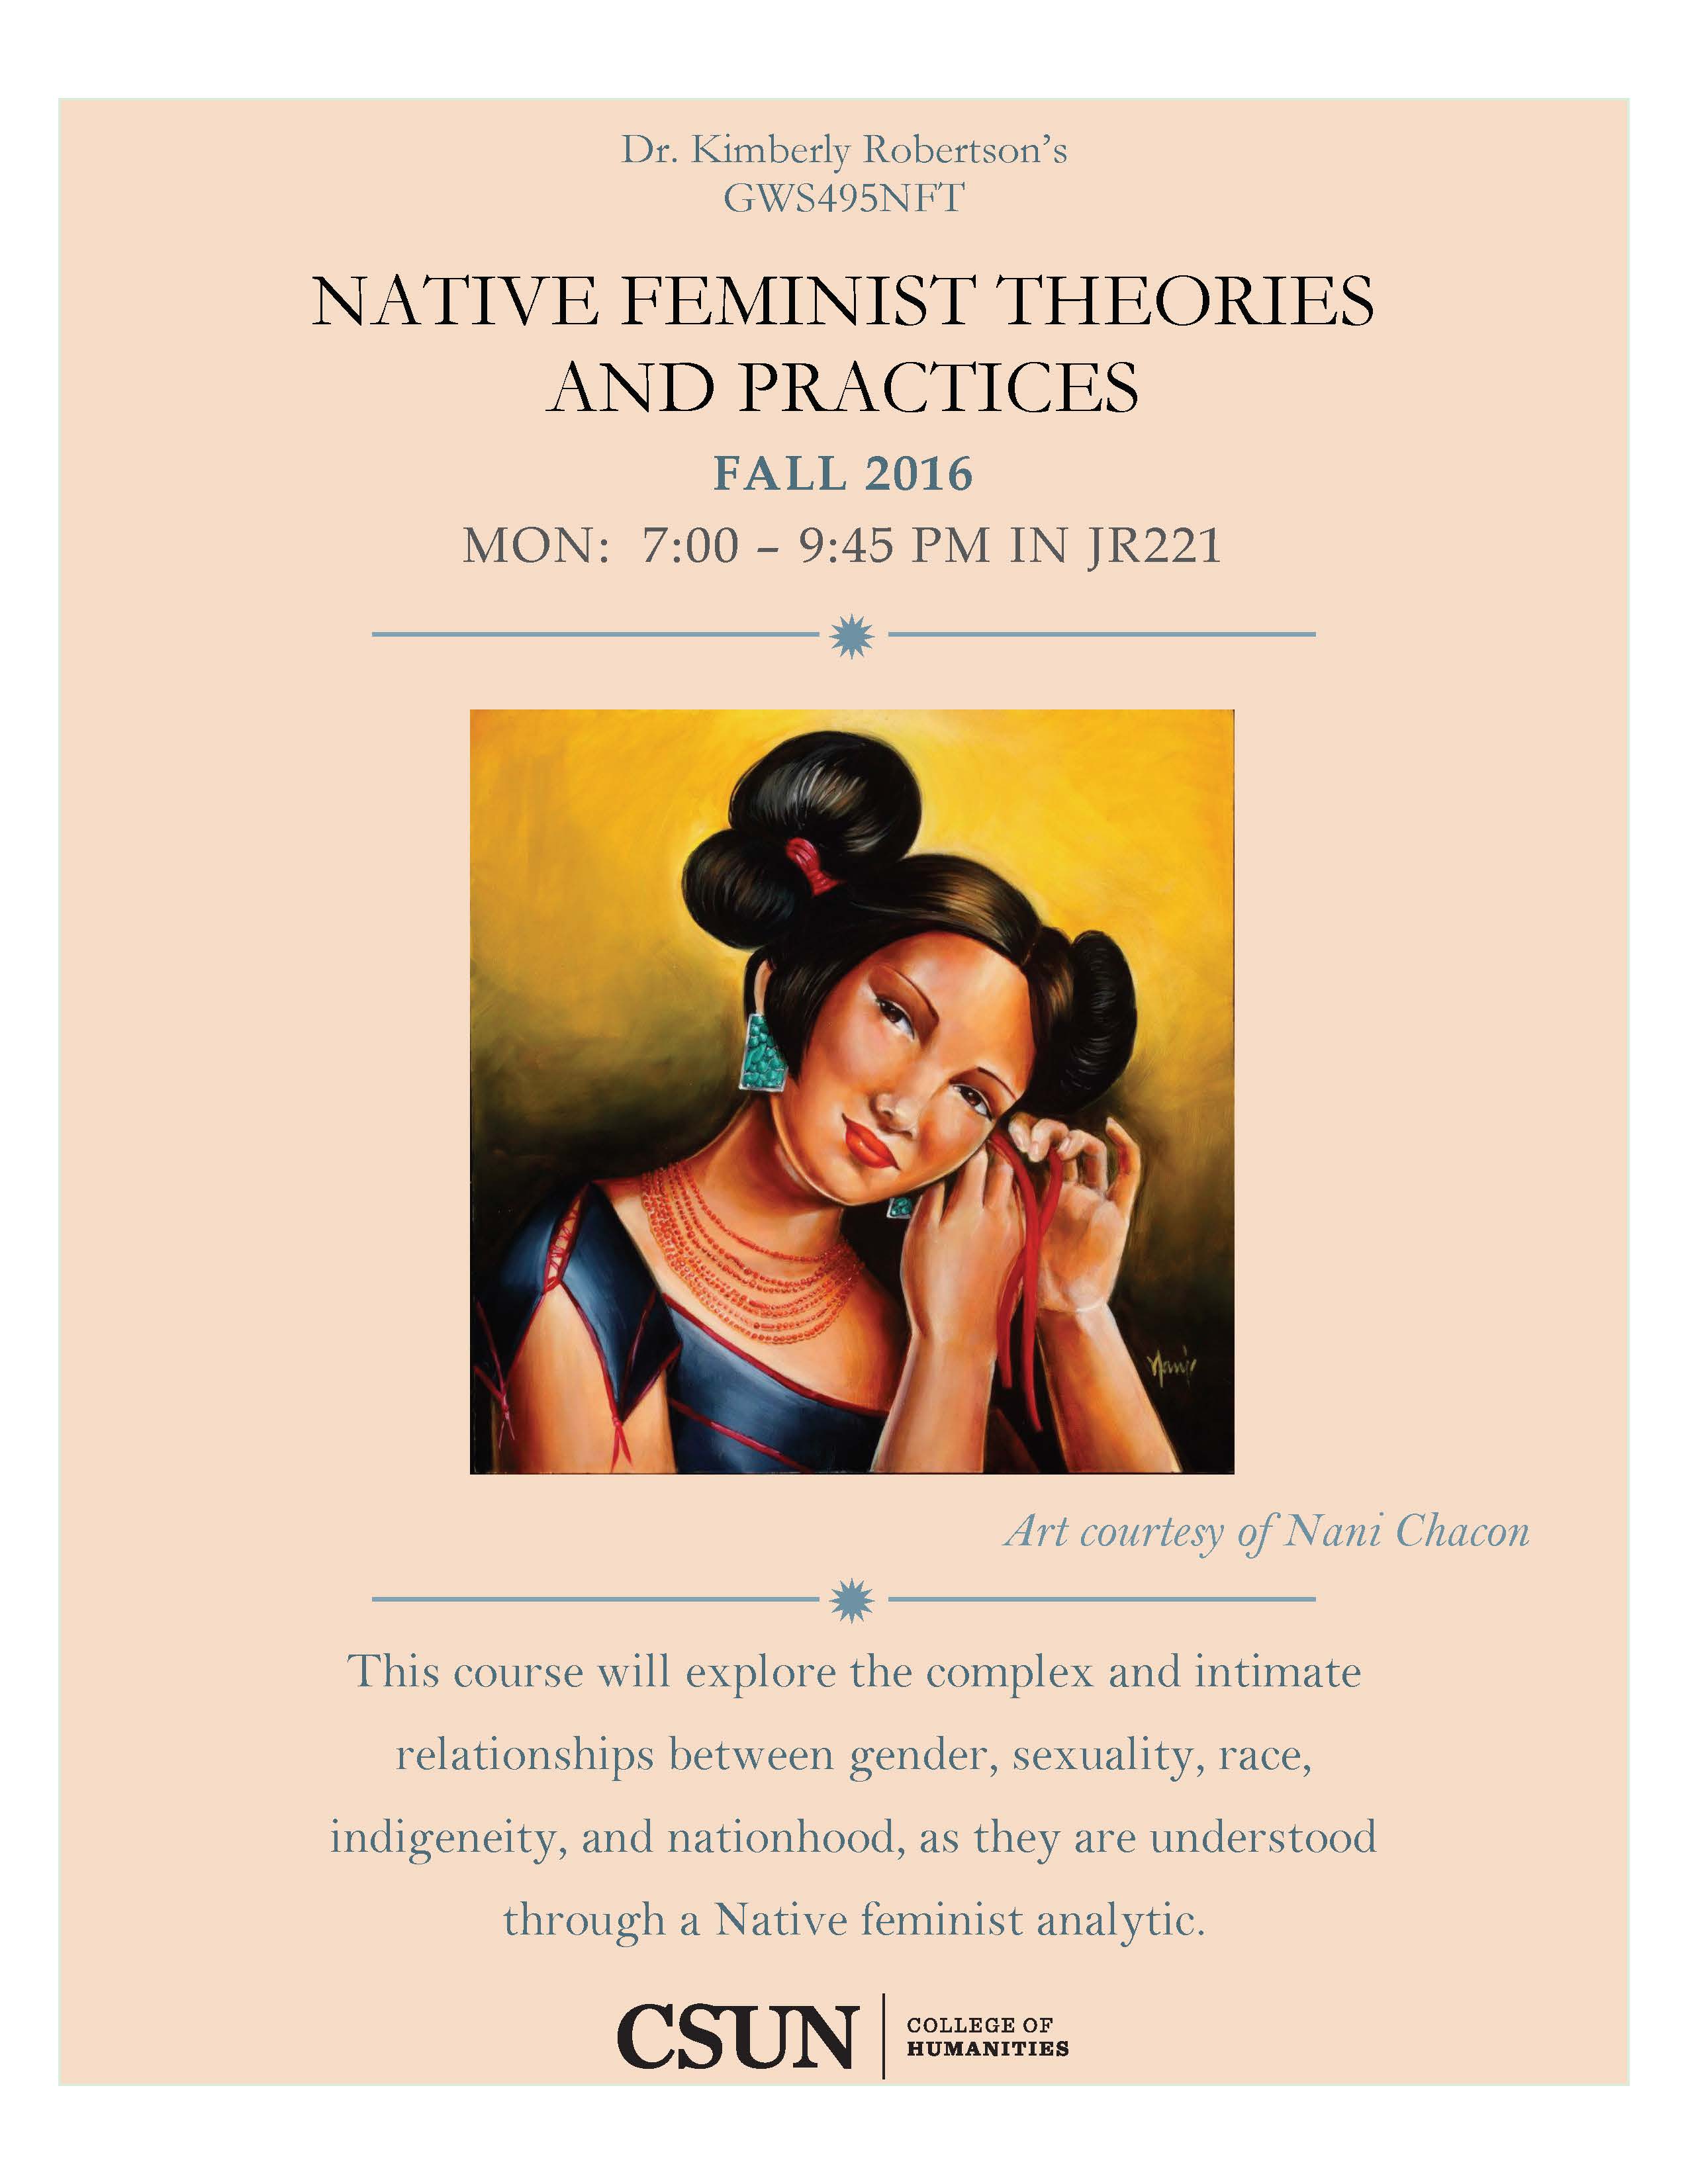 GWS495 Native Feminist Theories and Practices